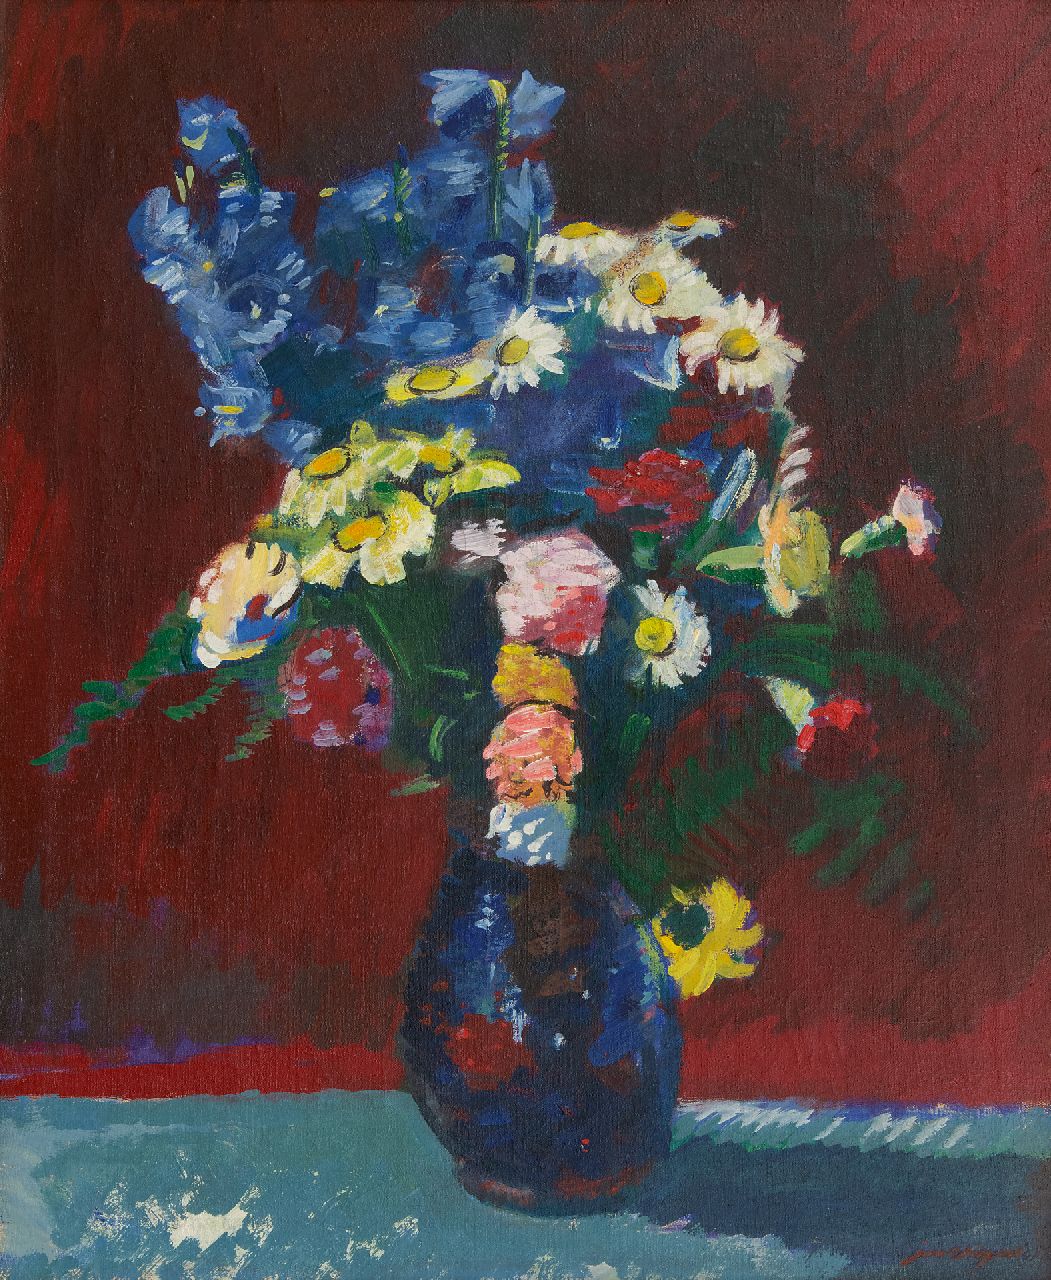 Wiegers J.  | Jan Wiegers | Paintings offered for sale | A summer bouquet, oil on canvas 73.7 x 60.3 cm, signed l.r. and dated '41